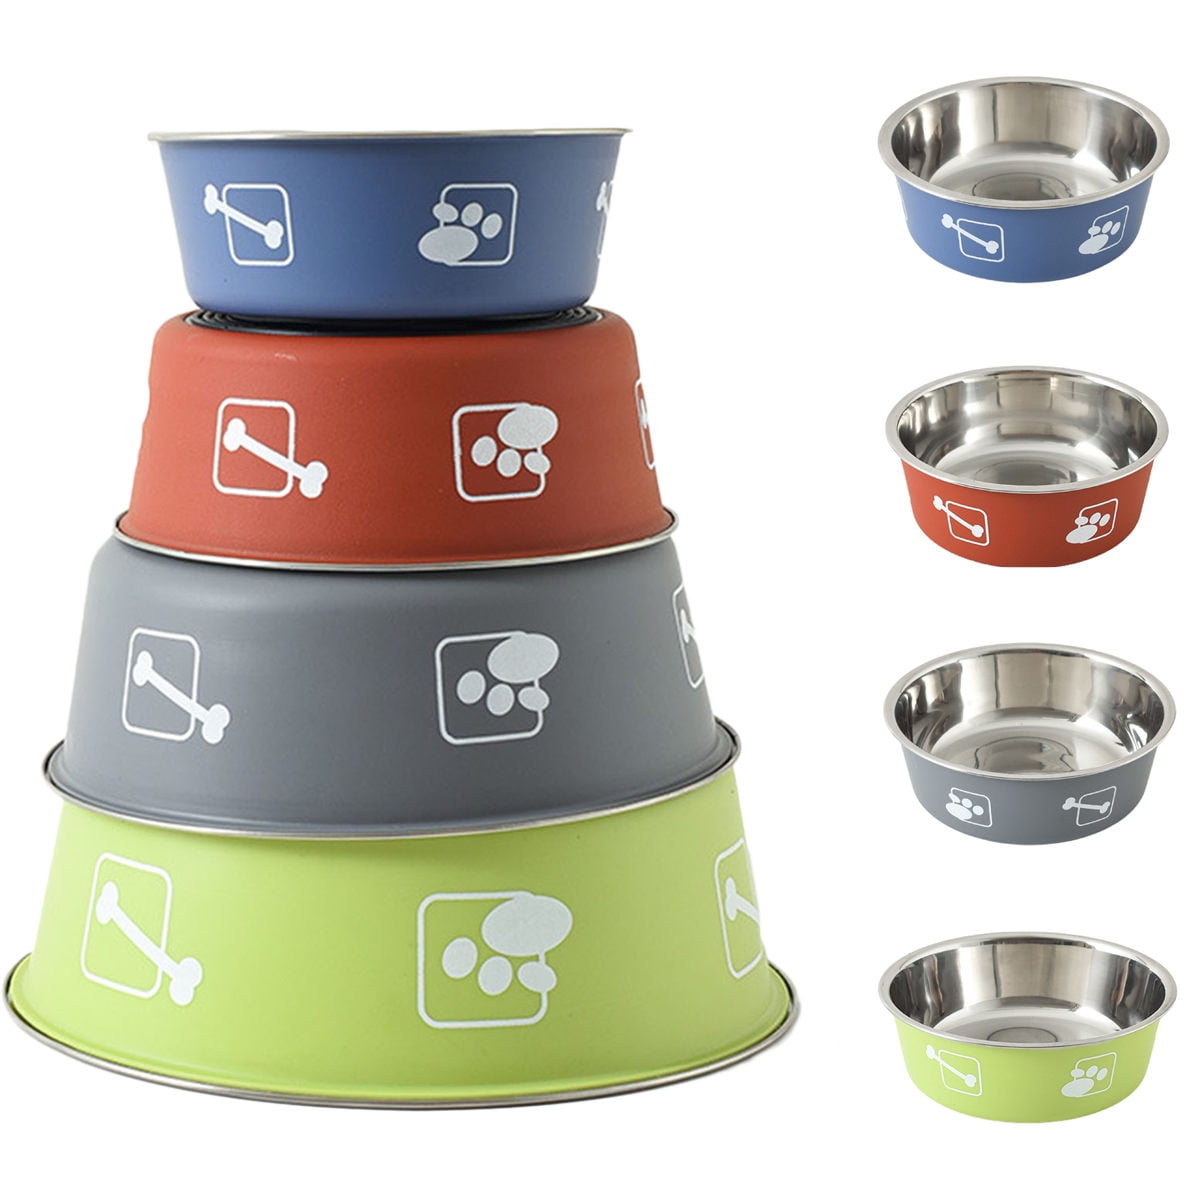 Dog Bowl Stainless Steel Dog Bowl with Rubber Base for 26OZ Small/Medium/Large Dogs,Pets Feeder Bowl and Water Bowl Perfect Choice,Dogs and Kittens 